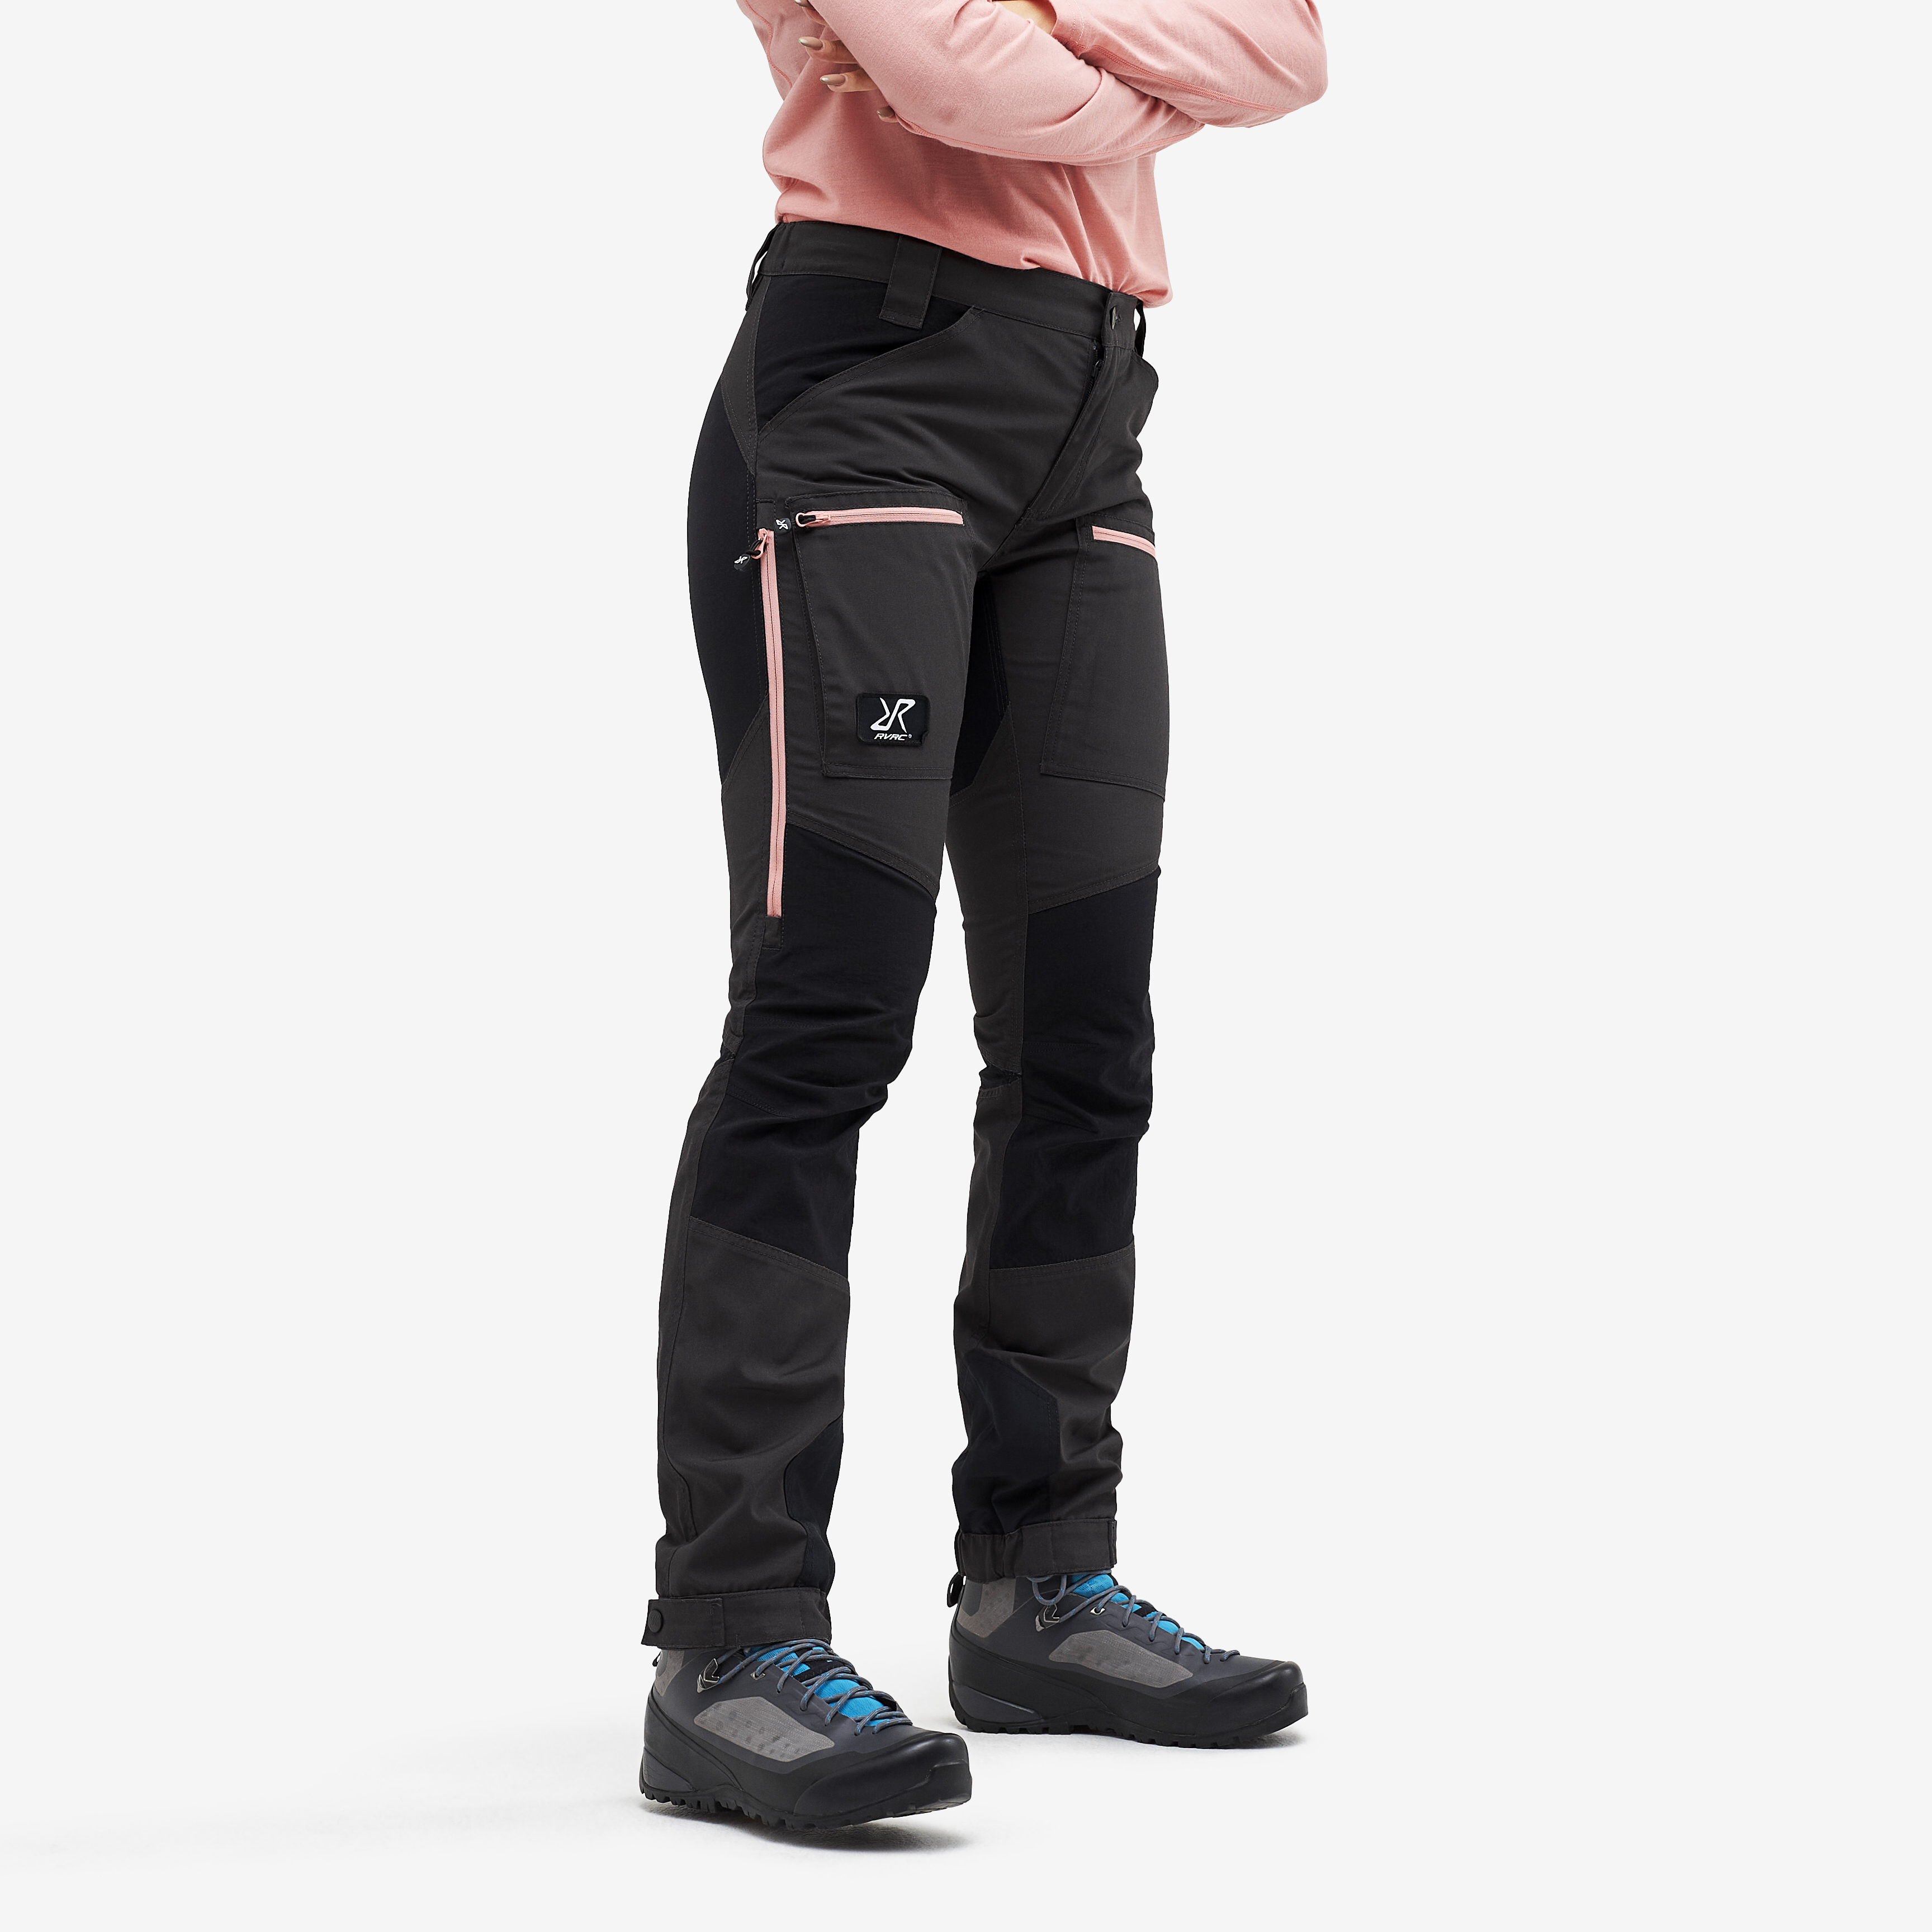 Nordwand Pro Pants Anthracite/Dusty pink Naiset